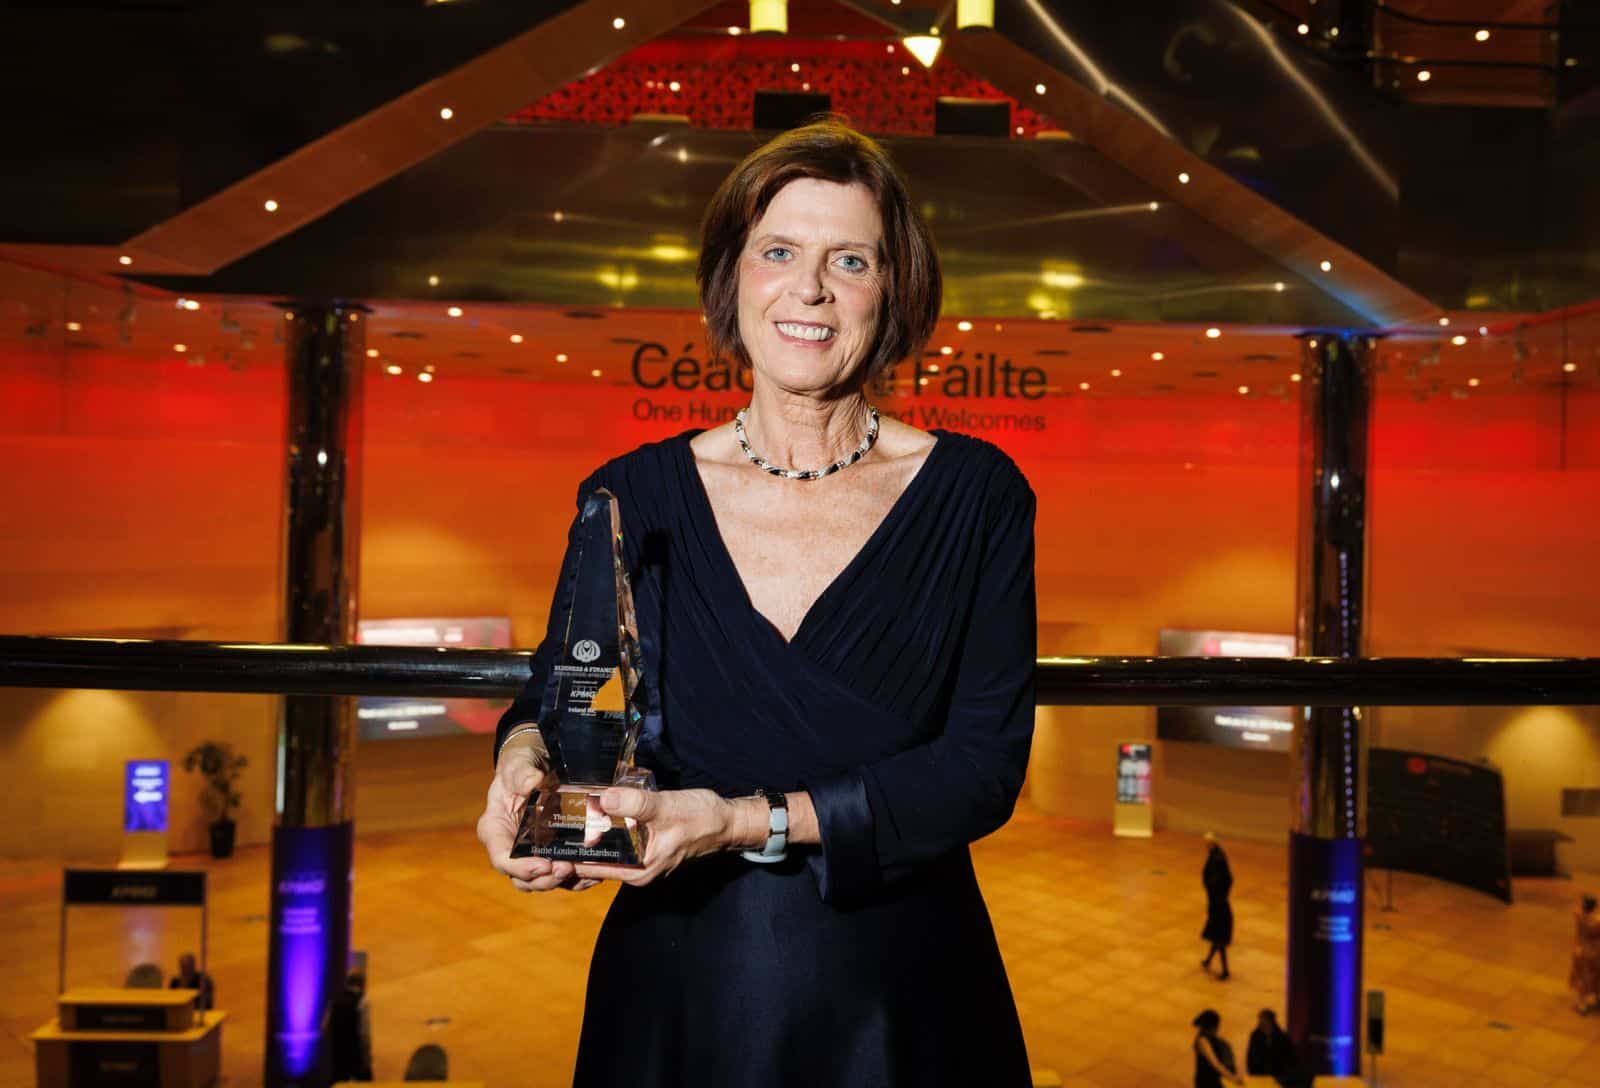 Dame Louise Richardson, dressed in an elegant navy blue evening gown, is holding a clear glass award with a smile. Sutherland Leadership Award